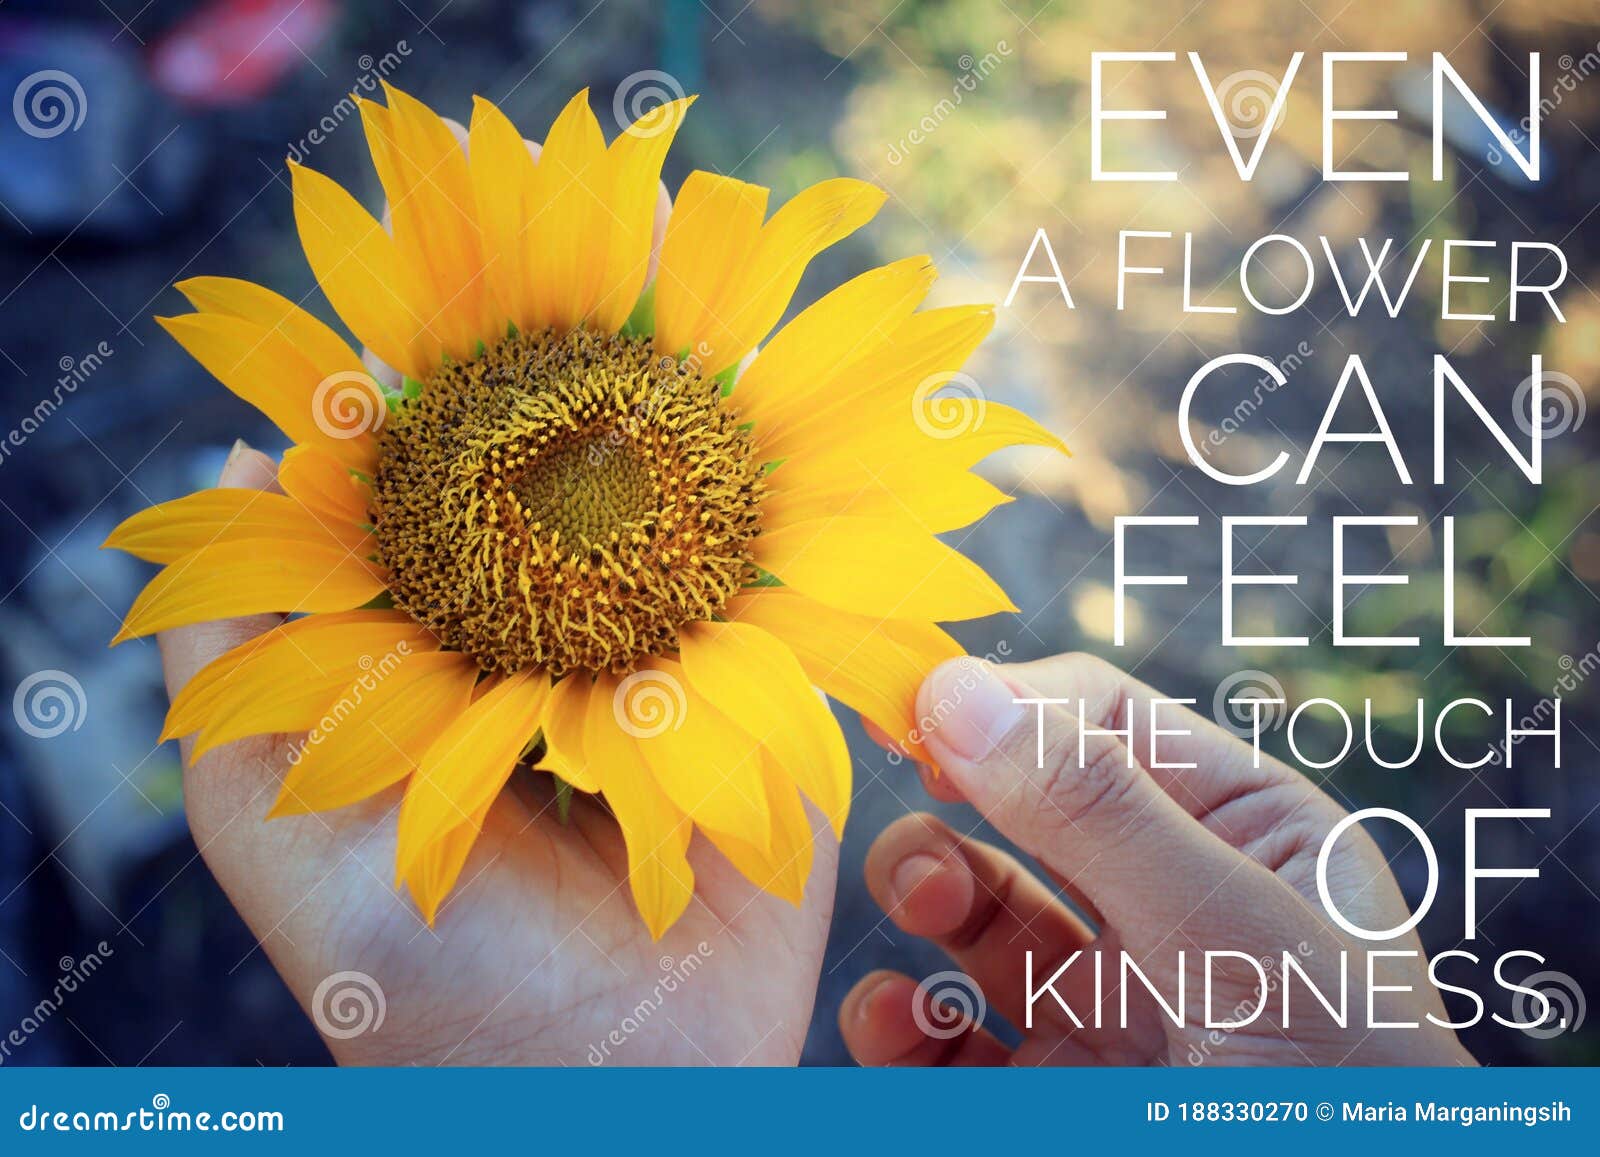 Inspirational Quote - Even a Flower Can Feel the Touch of Kindness ...